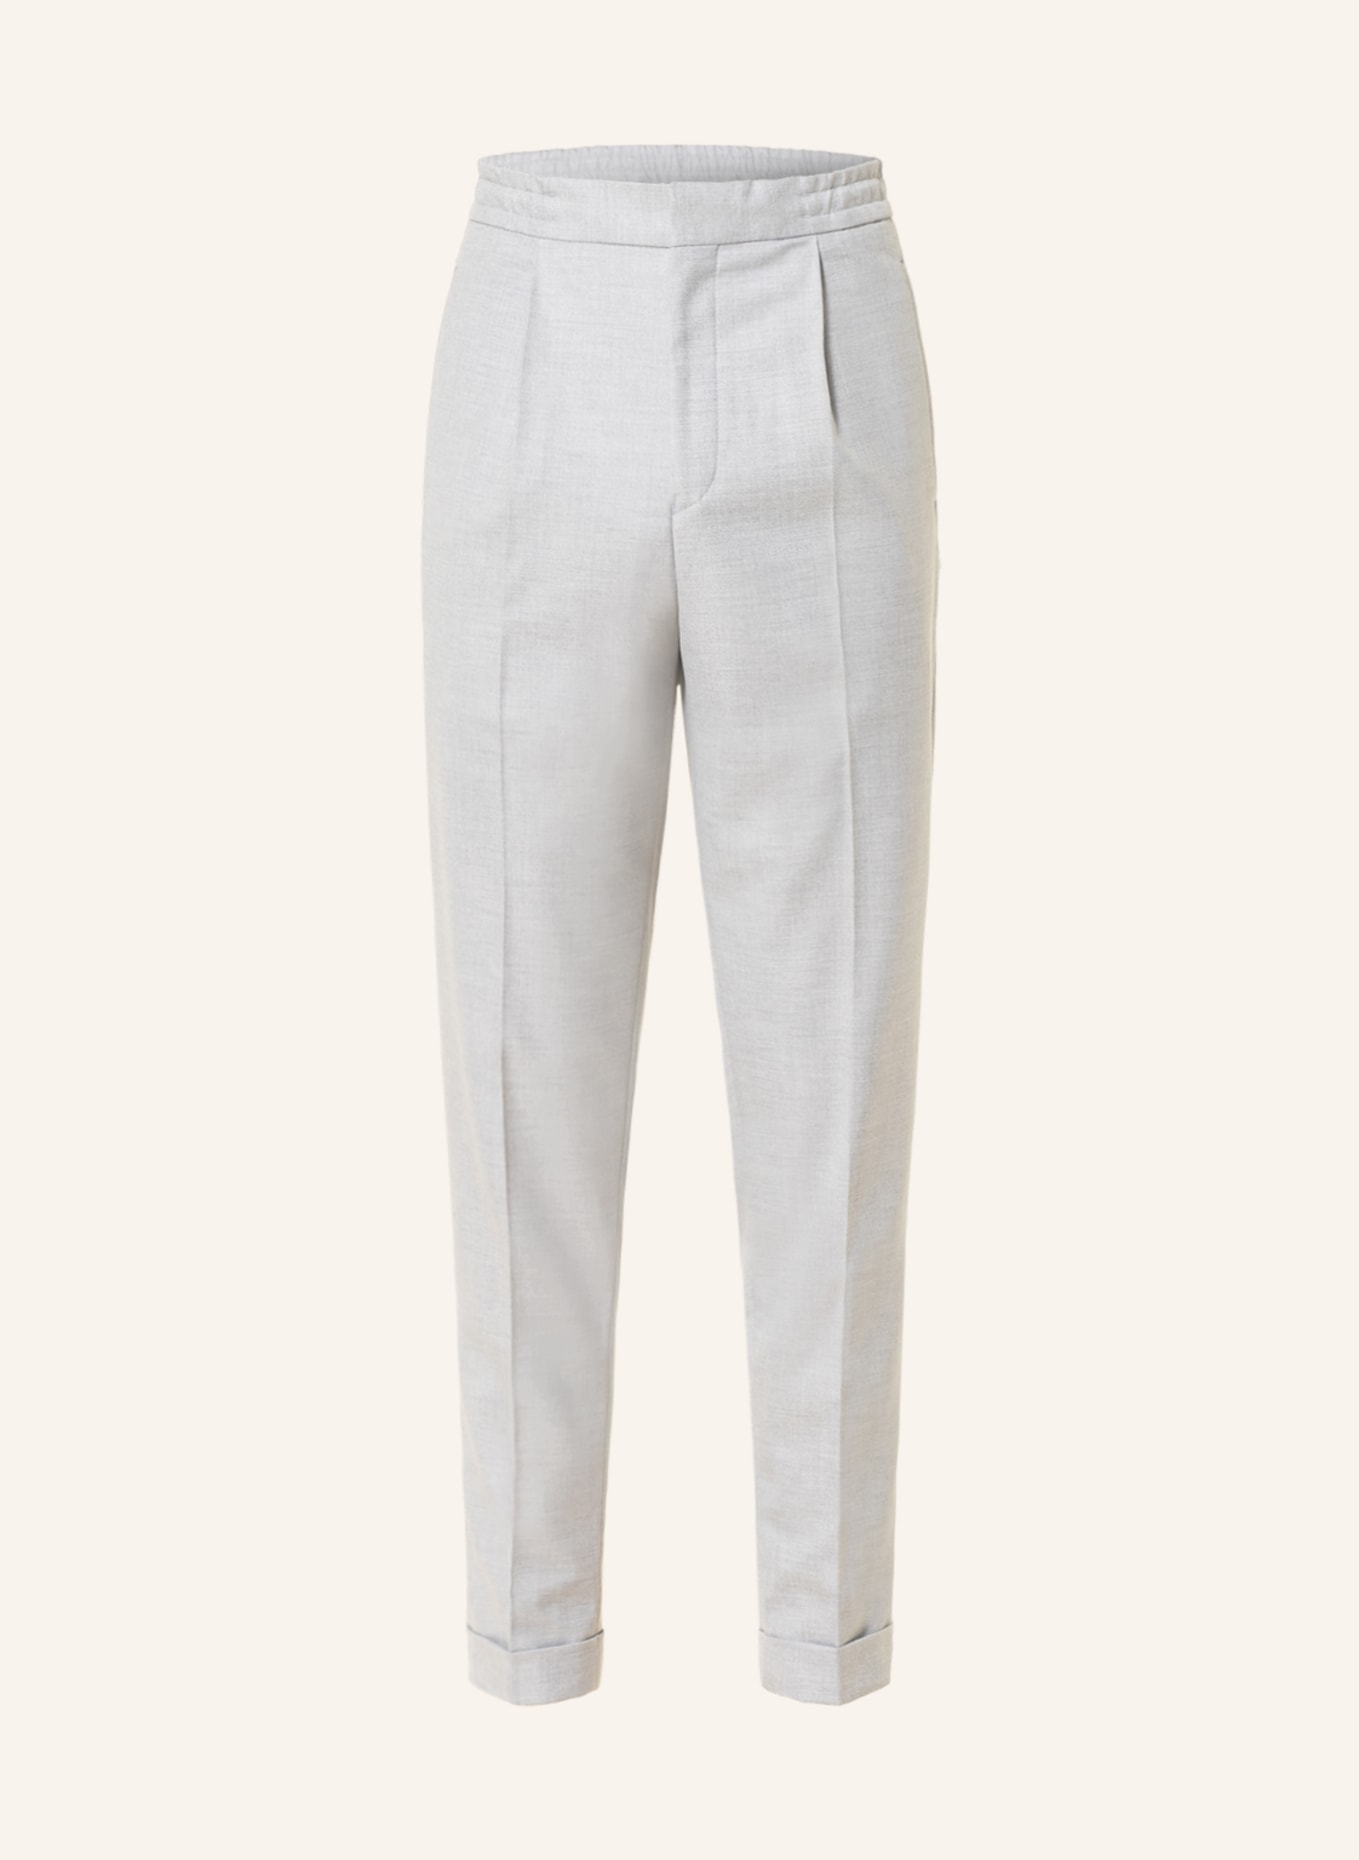 REISS Trousers BRIGHTON in jogger style extra slim fit , Color: GRAY (Image 1)